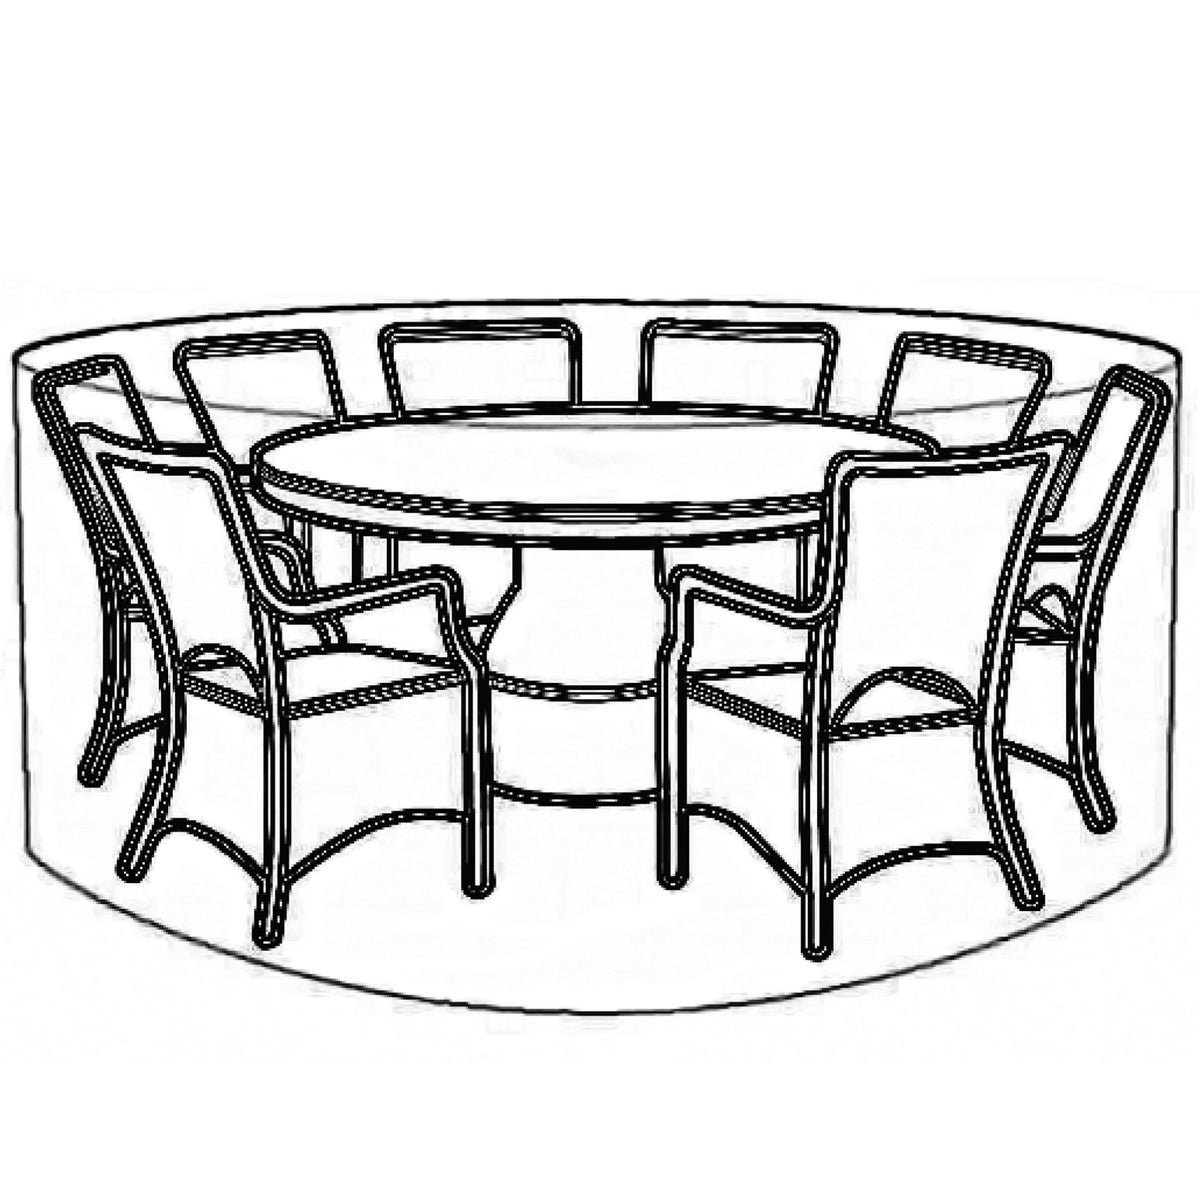 LG Outdoor 8 Seat Round Garden Furniture Set Deluxe Cover